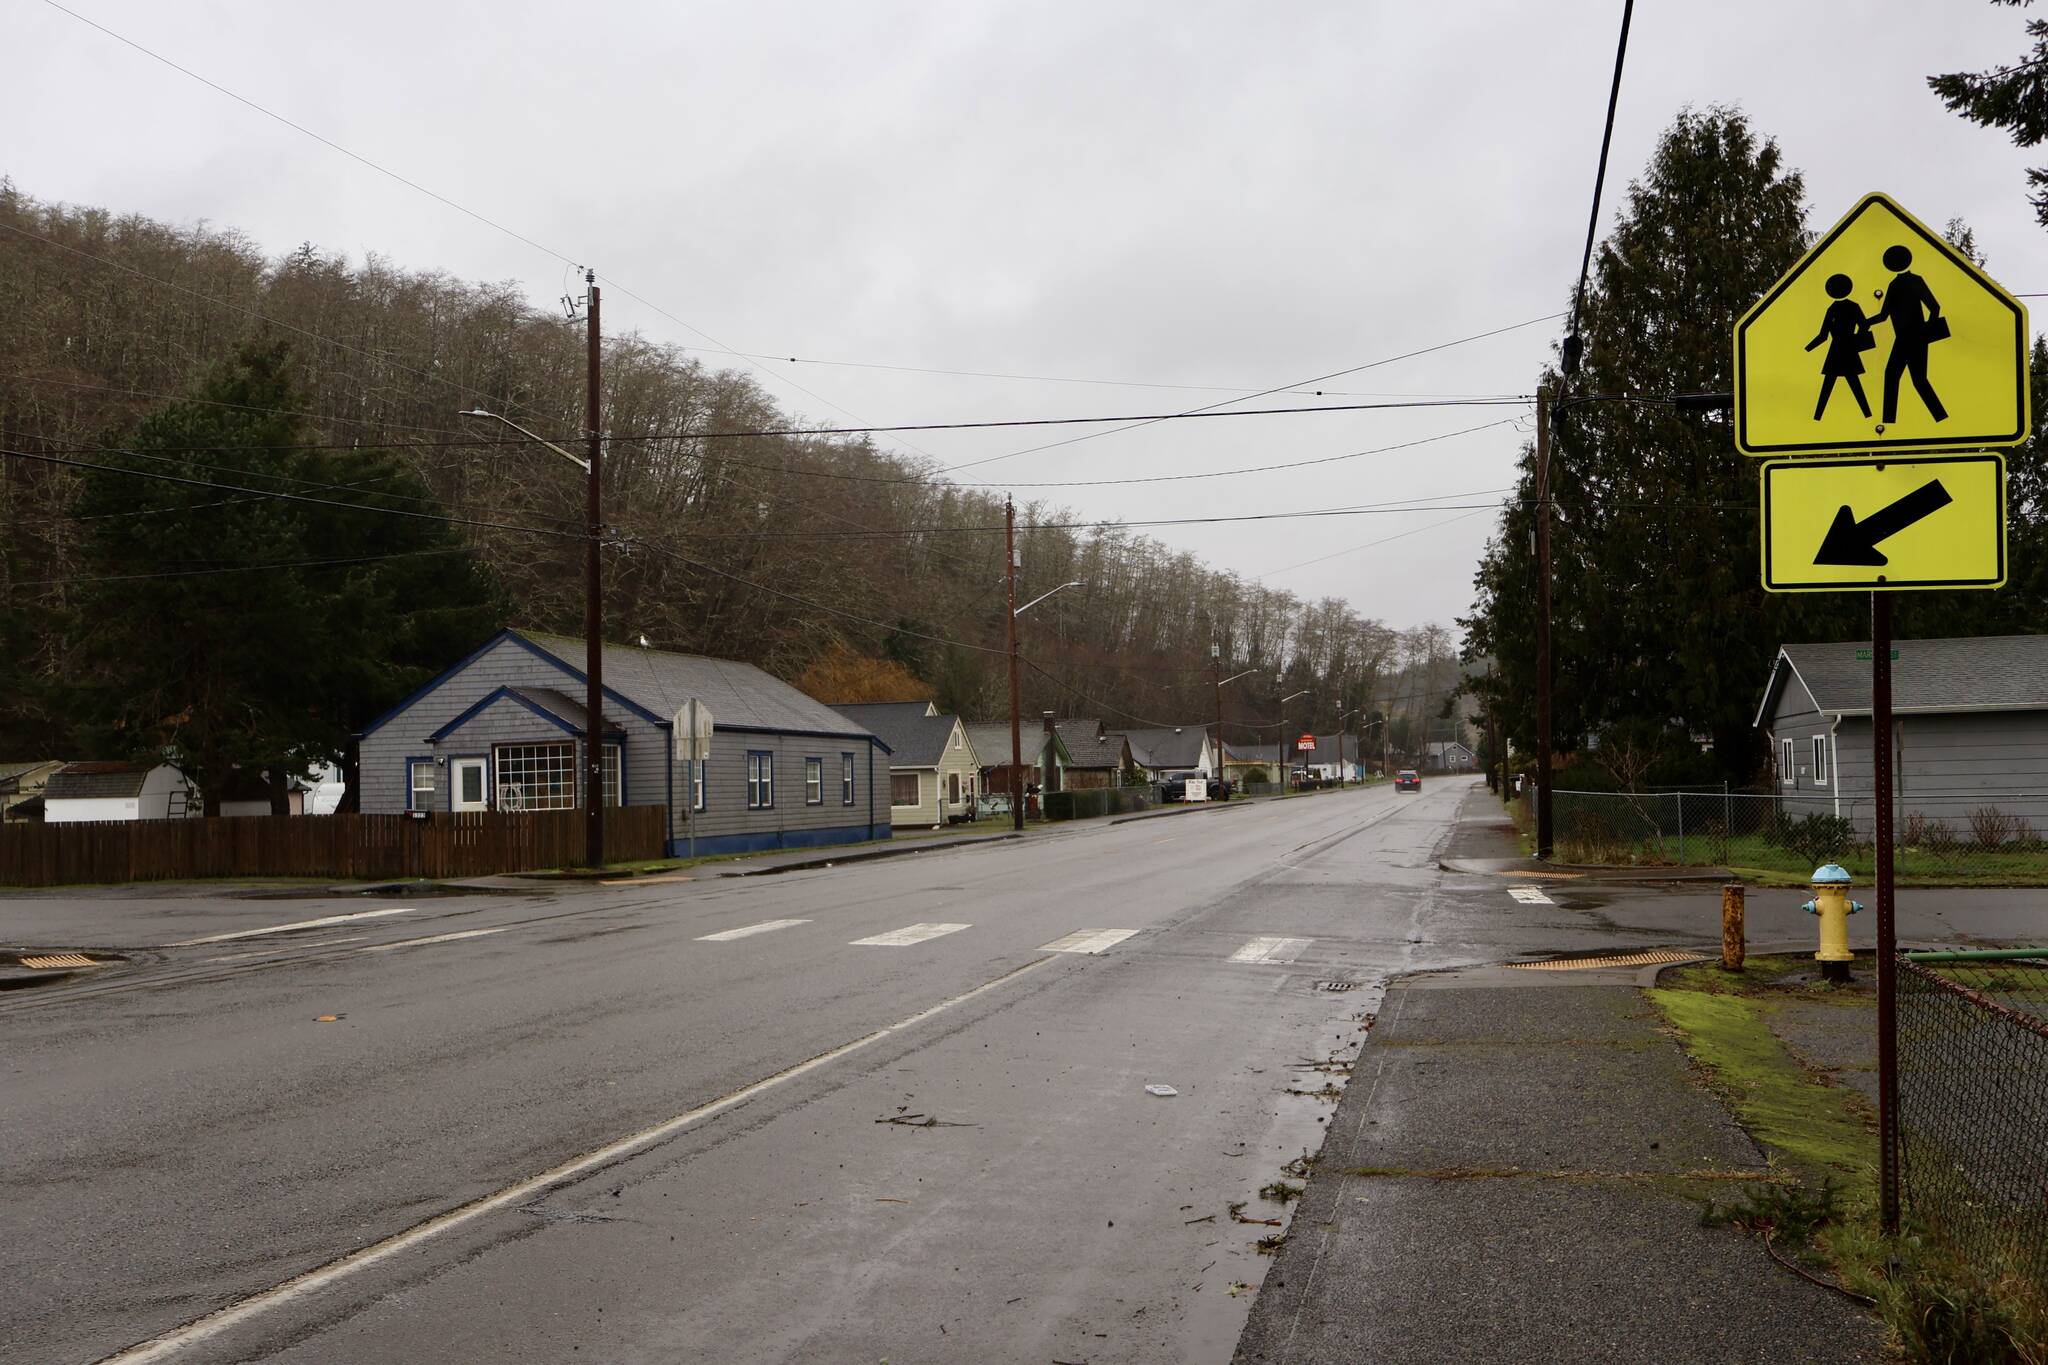 A girl was struck and seriously injured in Hoquiam in a hit-and-run on Thursday morning. (Michael S. Lockett / The Daily World)